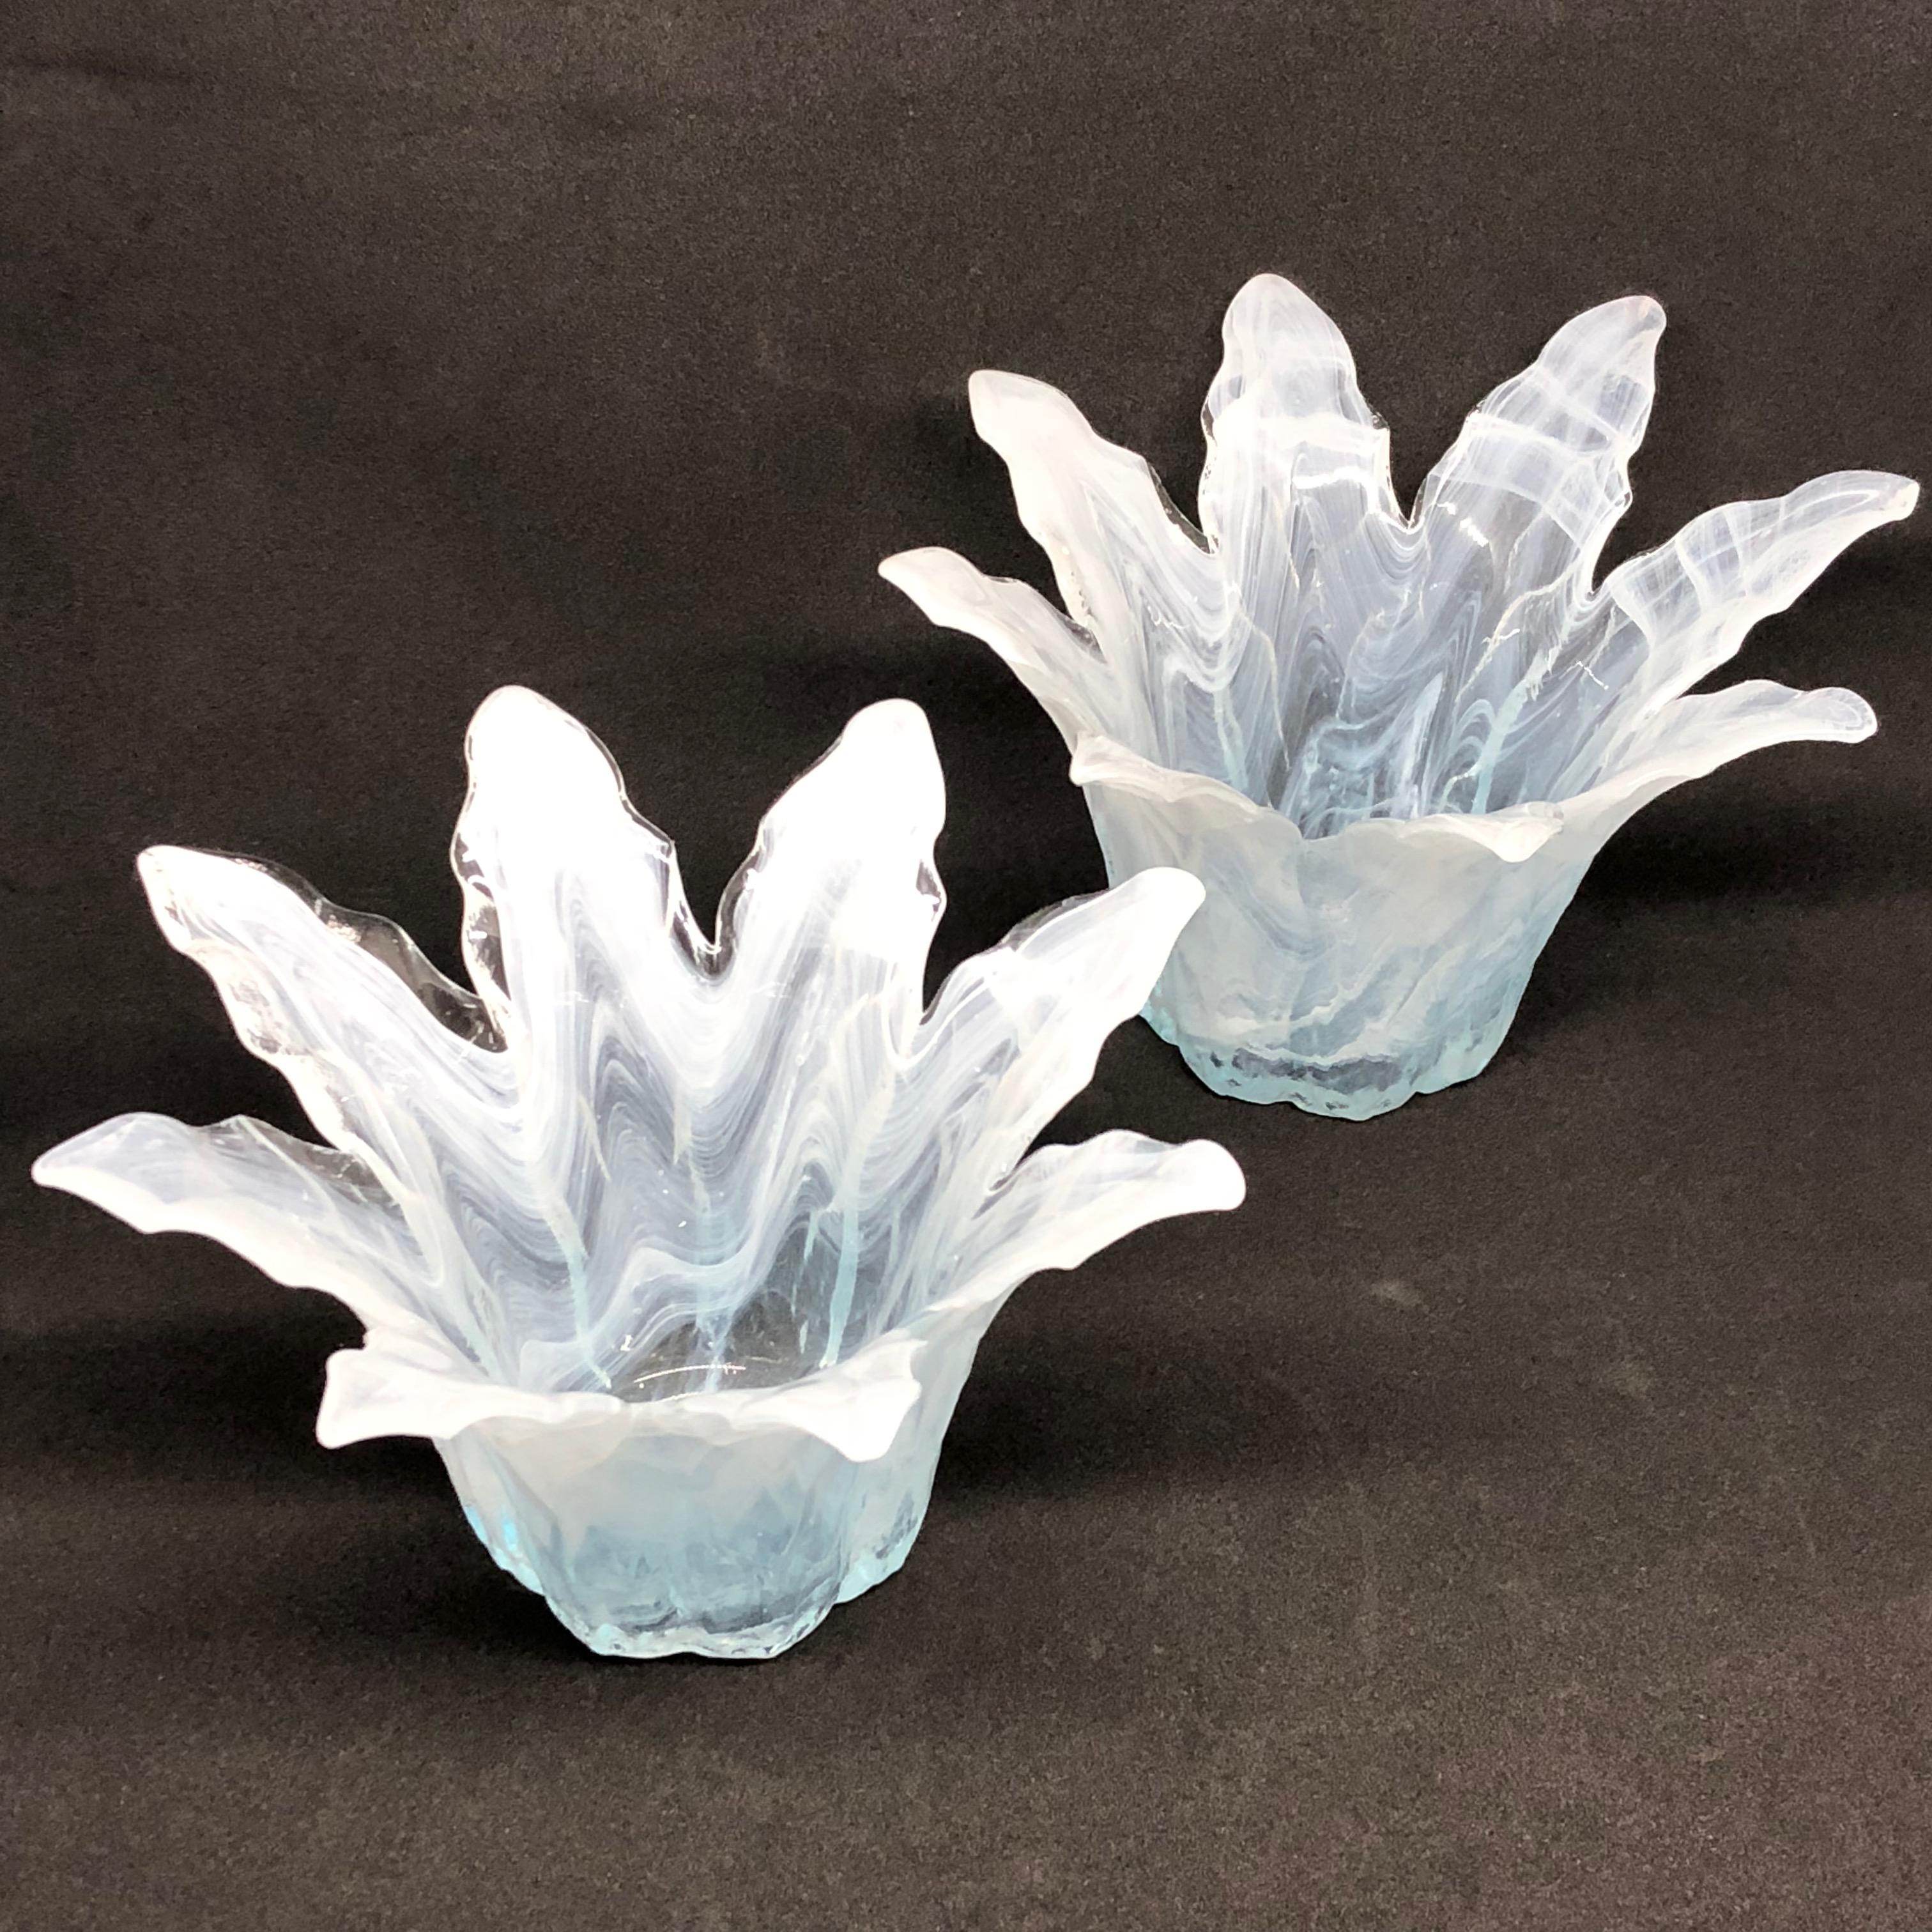 Gorgeous handblown Murano art glass finger foot bowls. A beautiful organic shaped bowl in clear glass with white Swirls, Italy, 1980s. Each is approximate 4 3/8